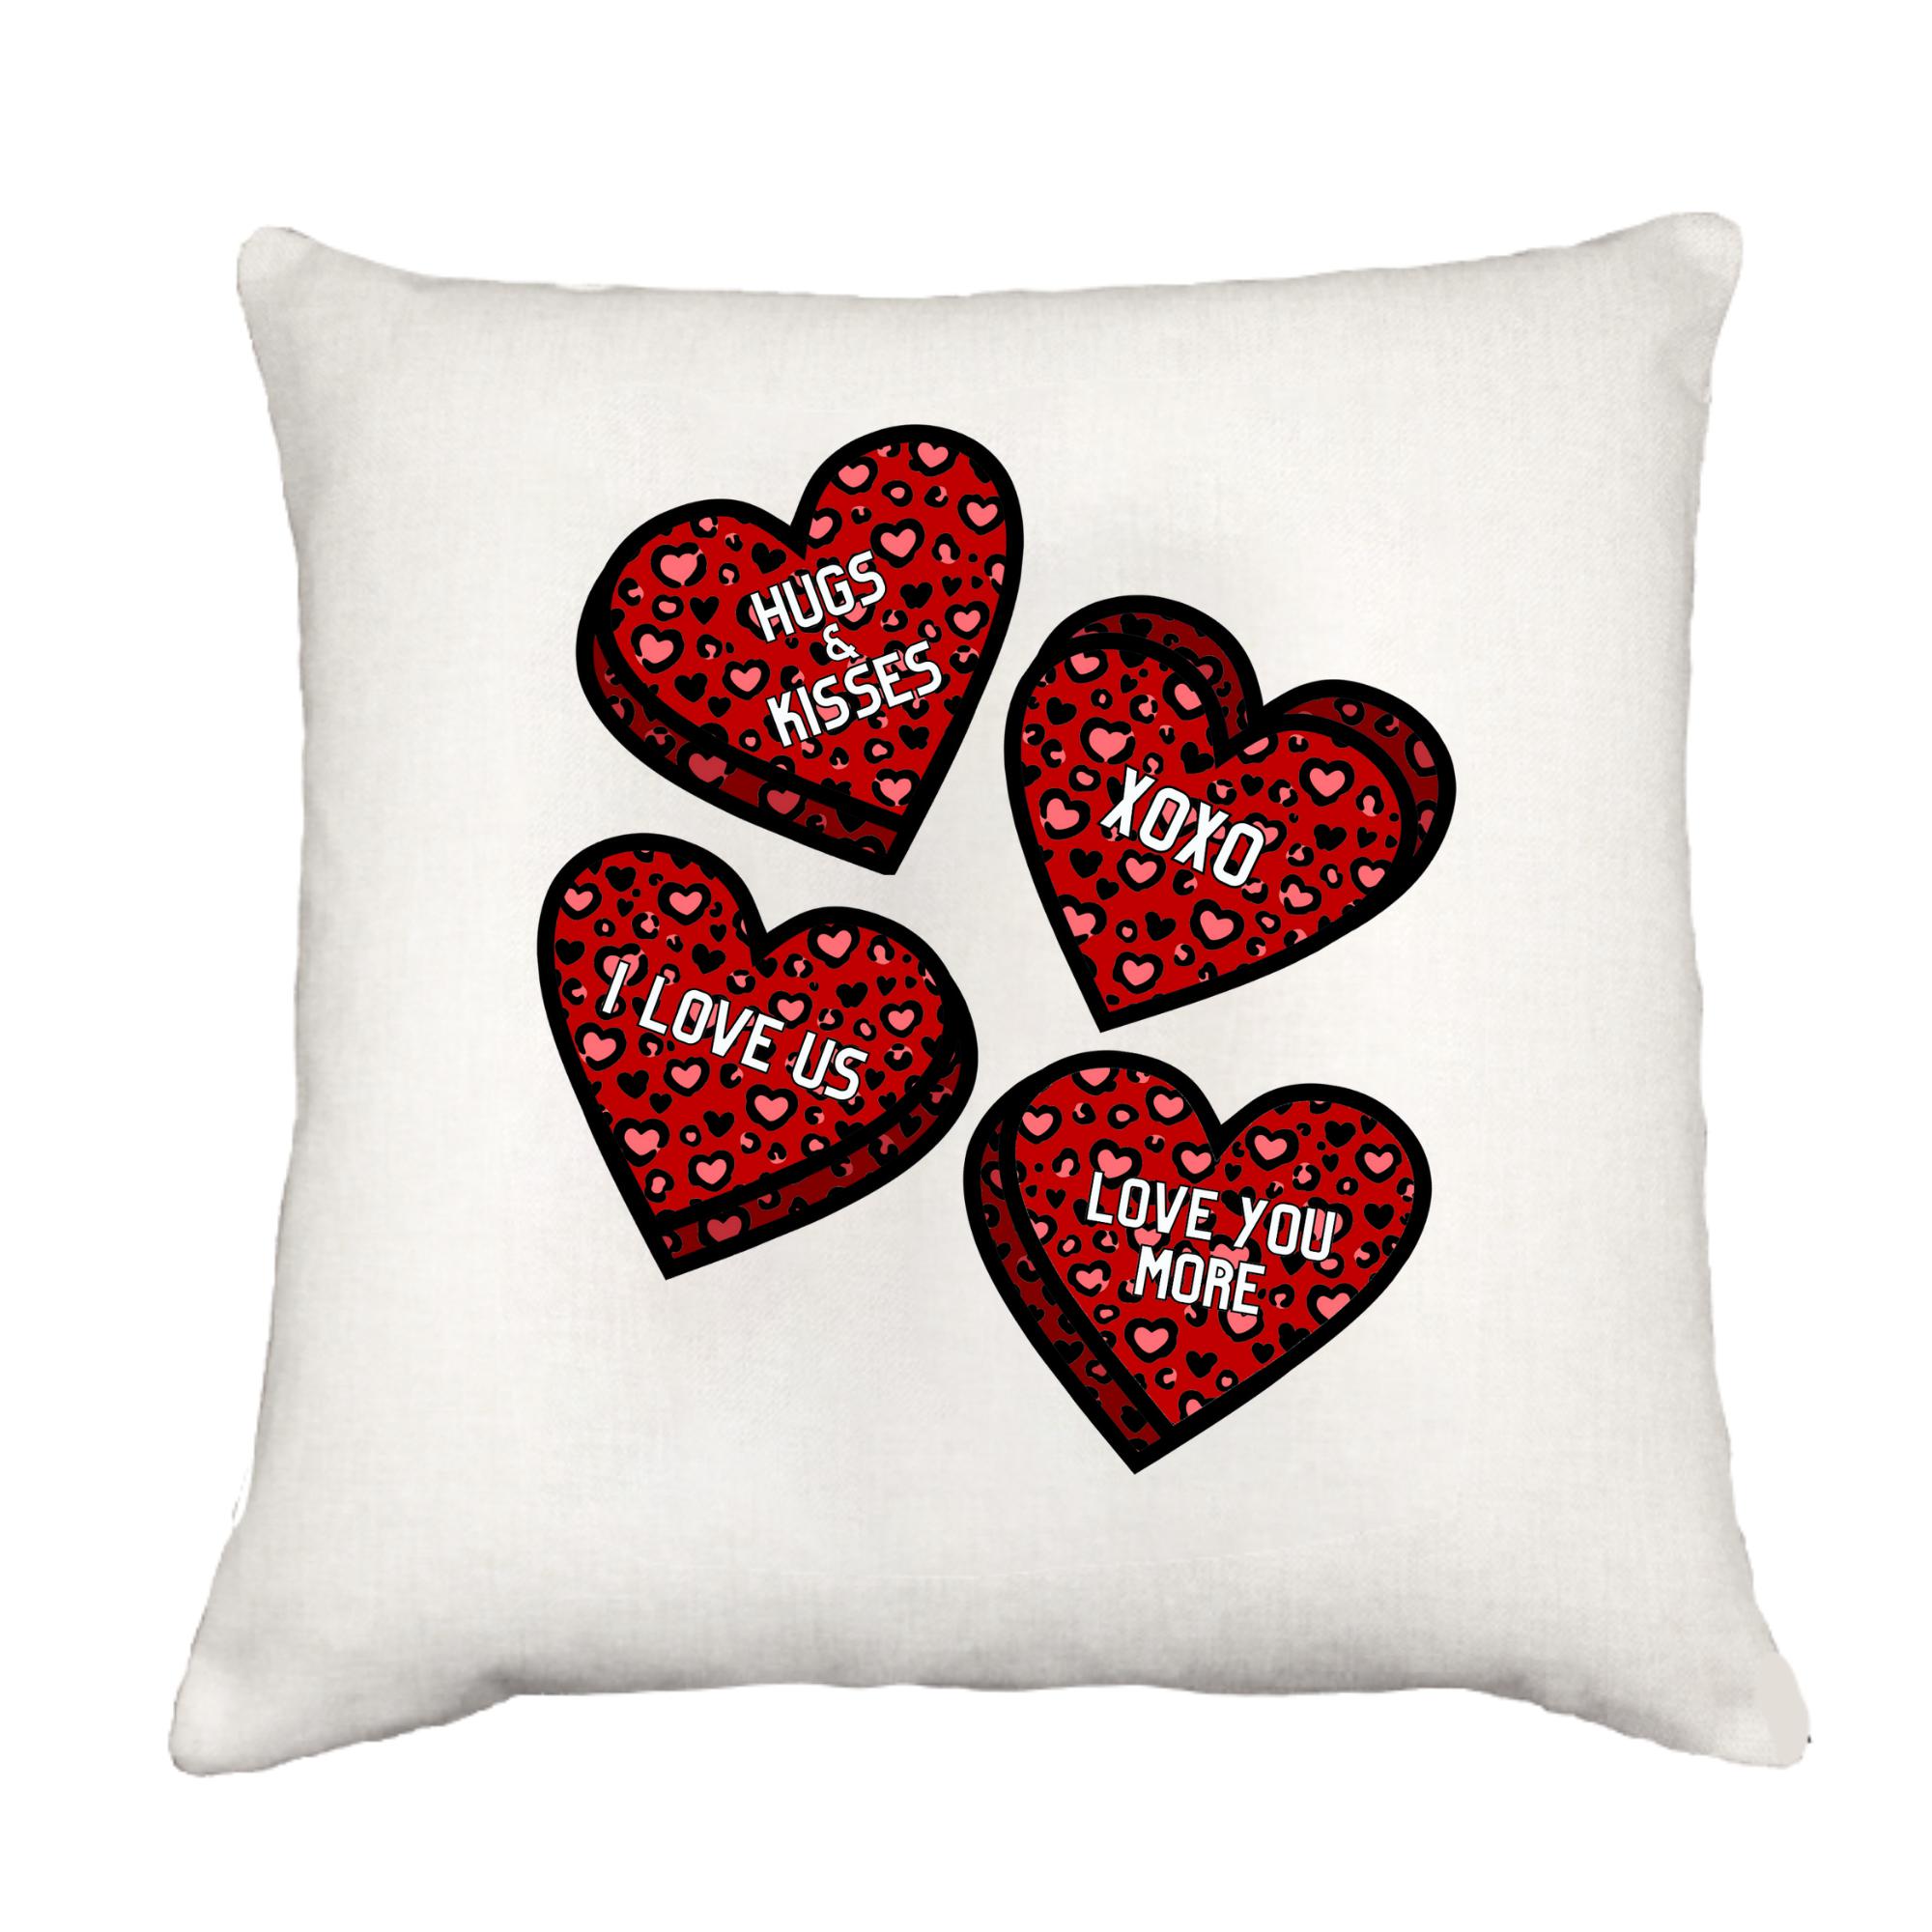 Candy Hearts Cottage Pillow Throw/Decorative Pillow - Southern Sisters